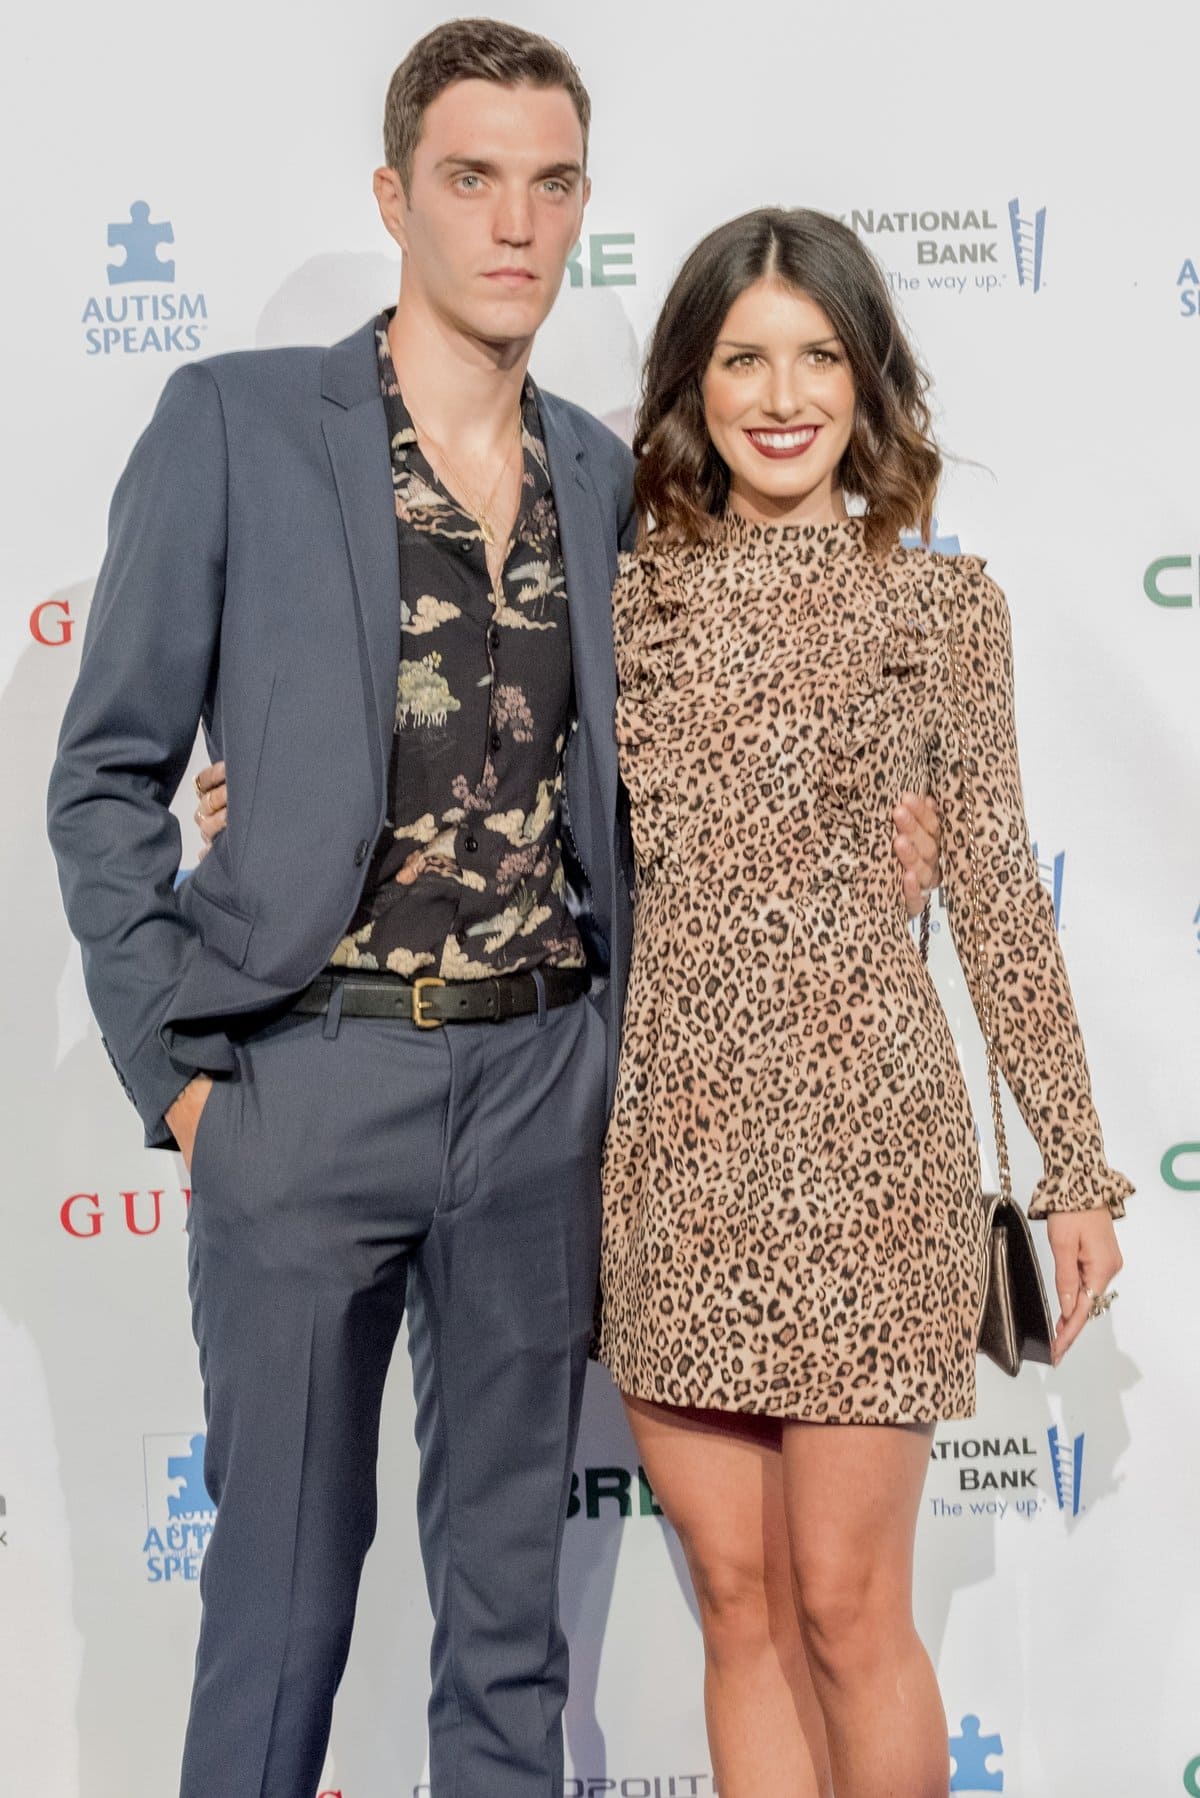 Actress Shenae Grimes and her husband Josh Beech met through a mutual friend in NYC and married in 2013